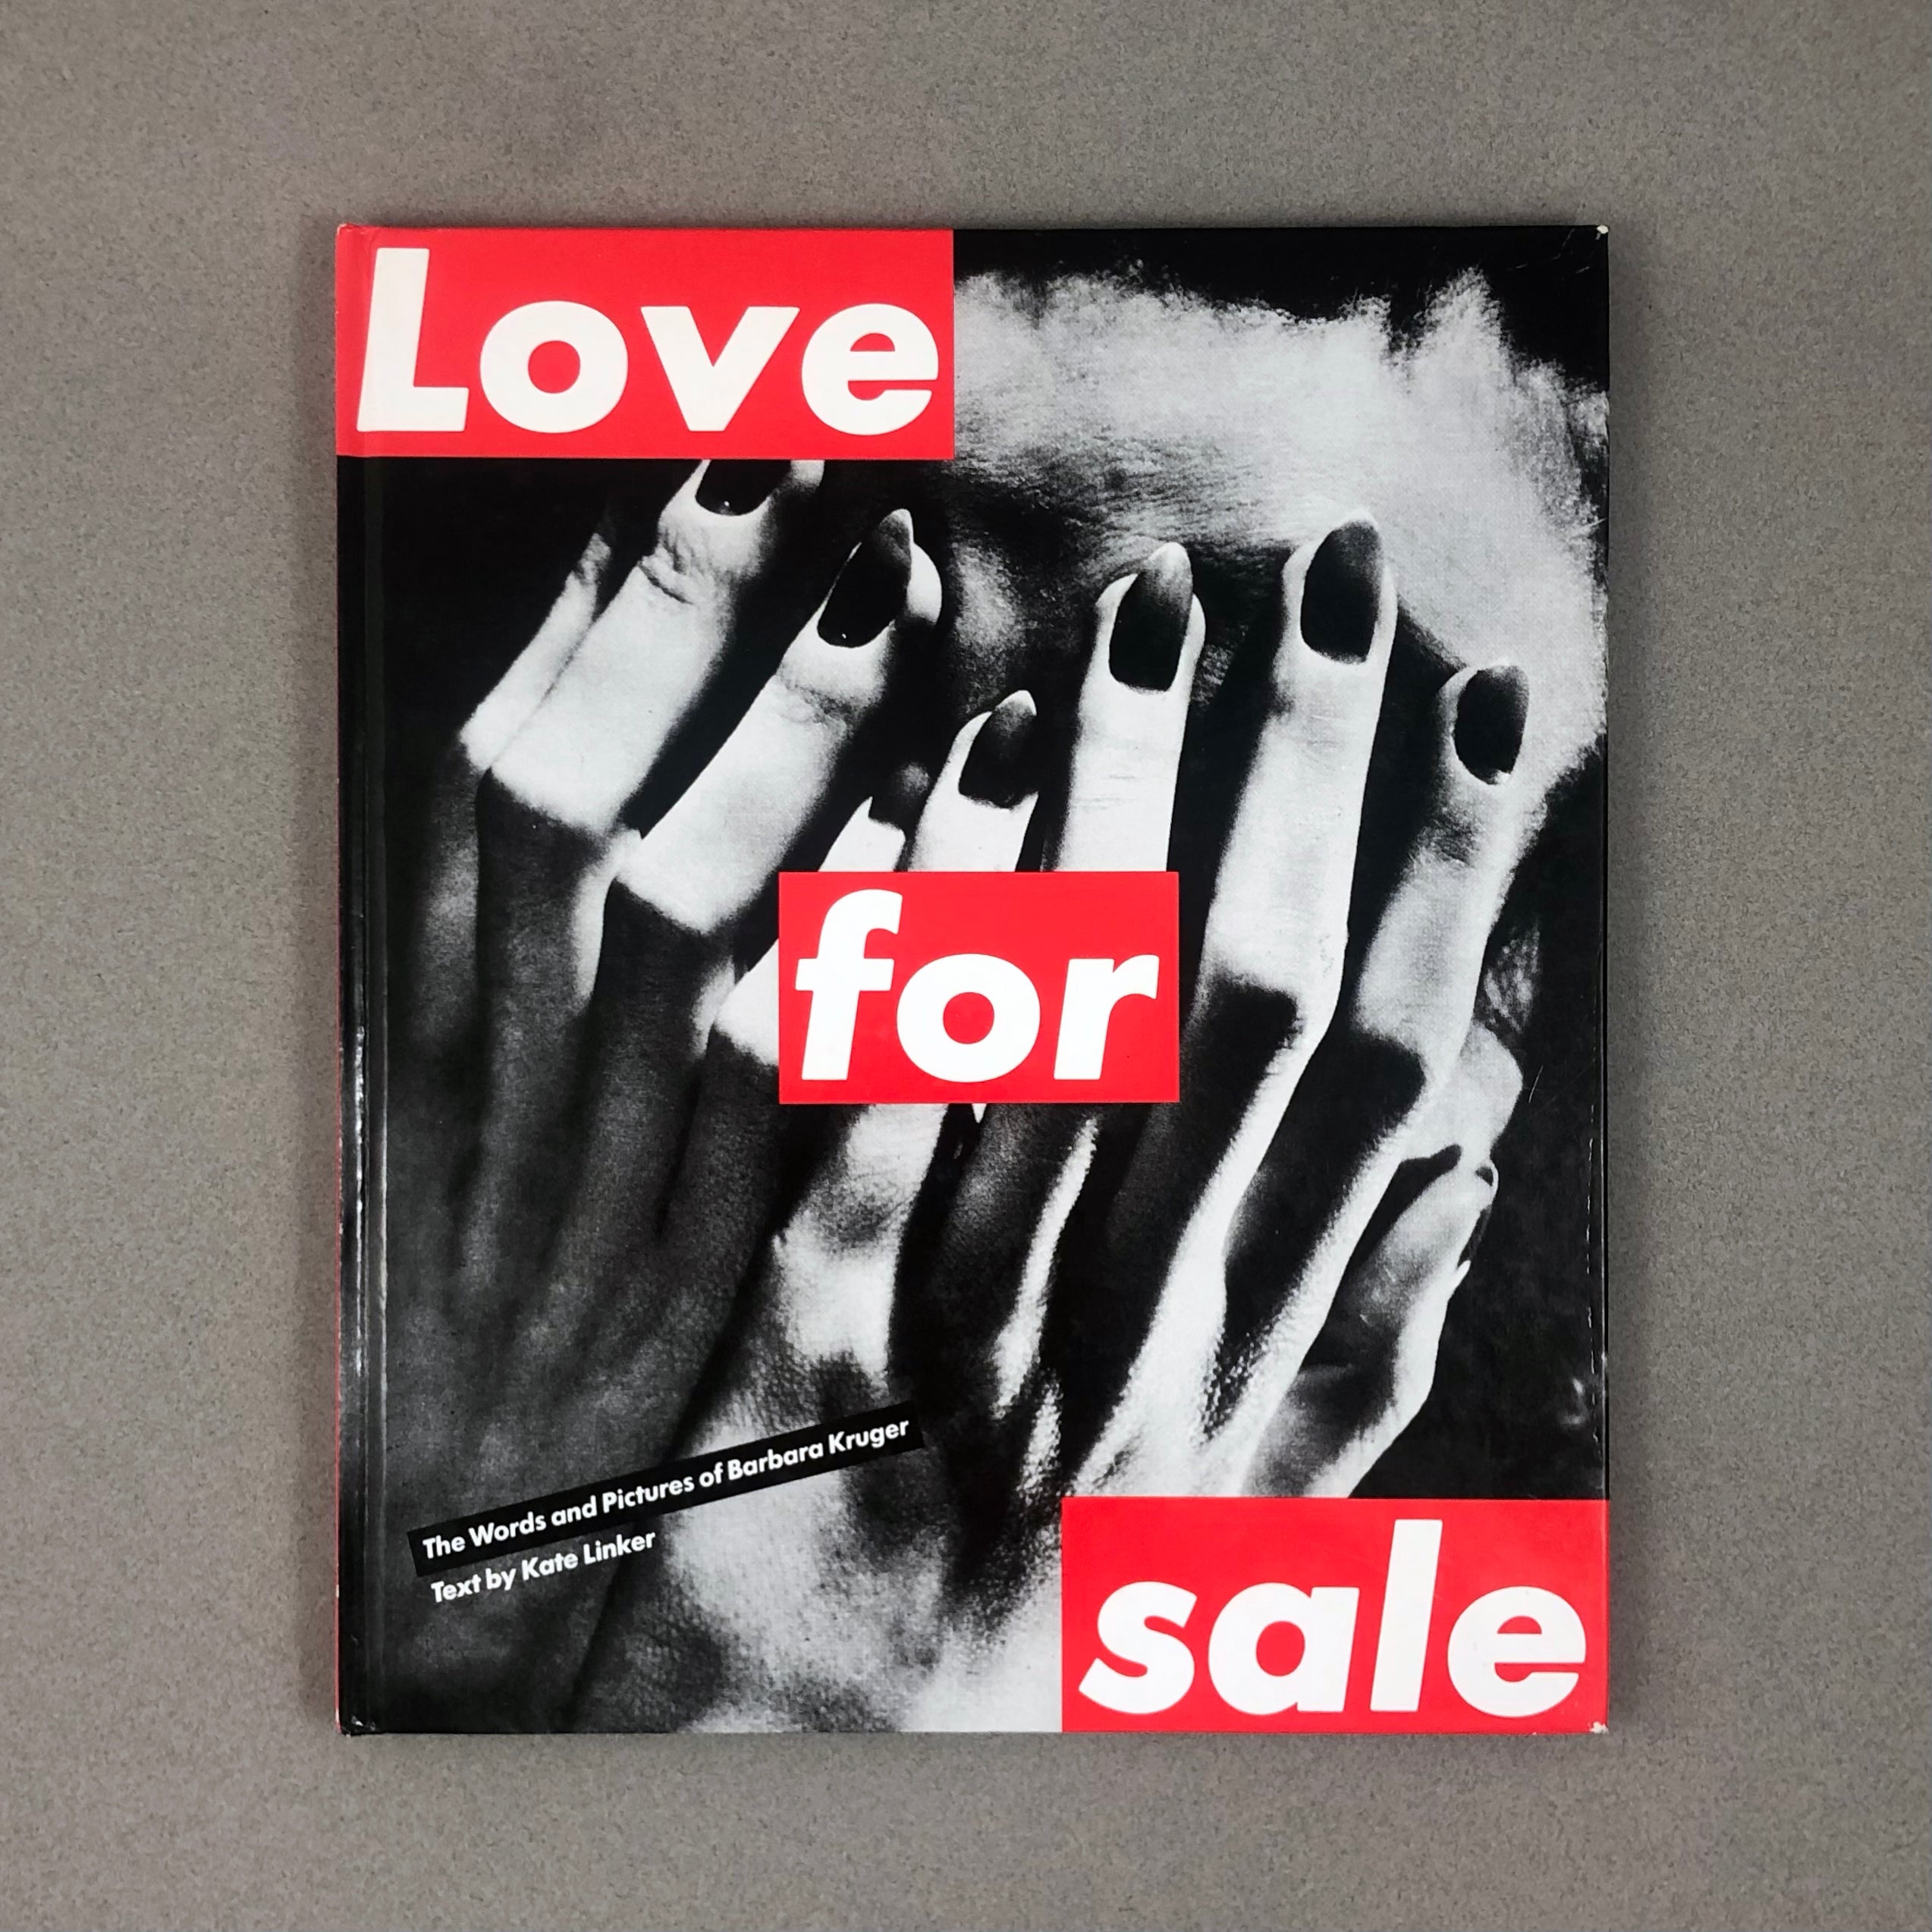 LOVE FOR SALE: THE WORDS AND PICTURES OF BARBARA KRUGER